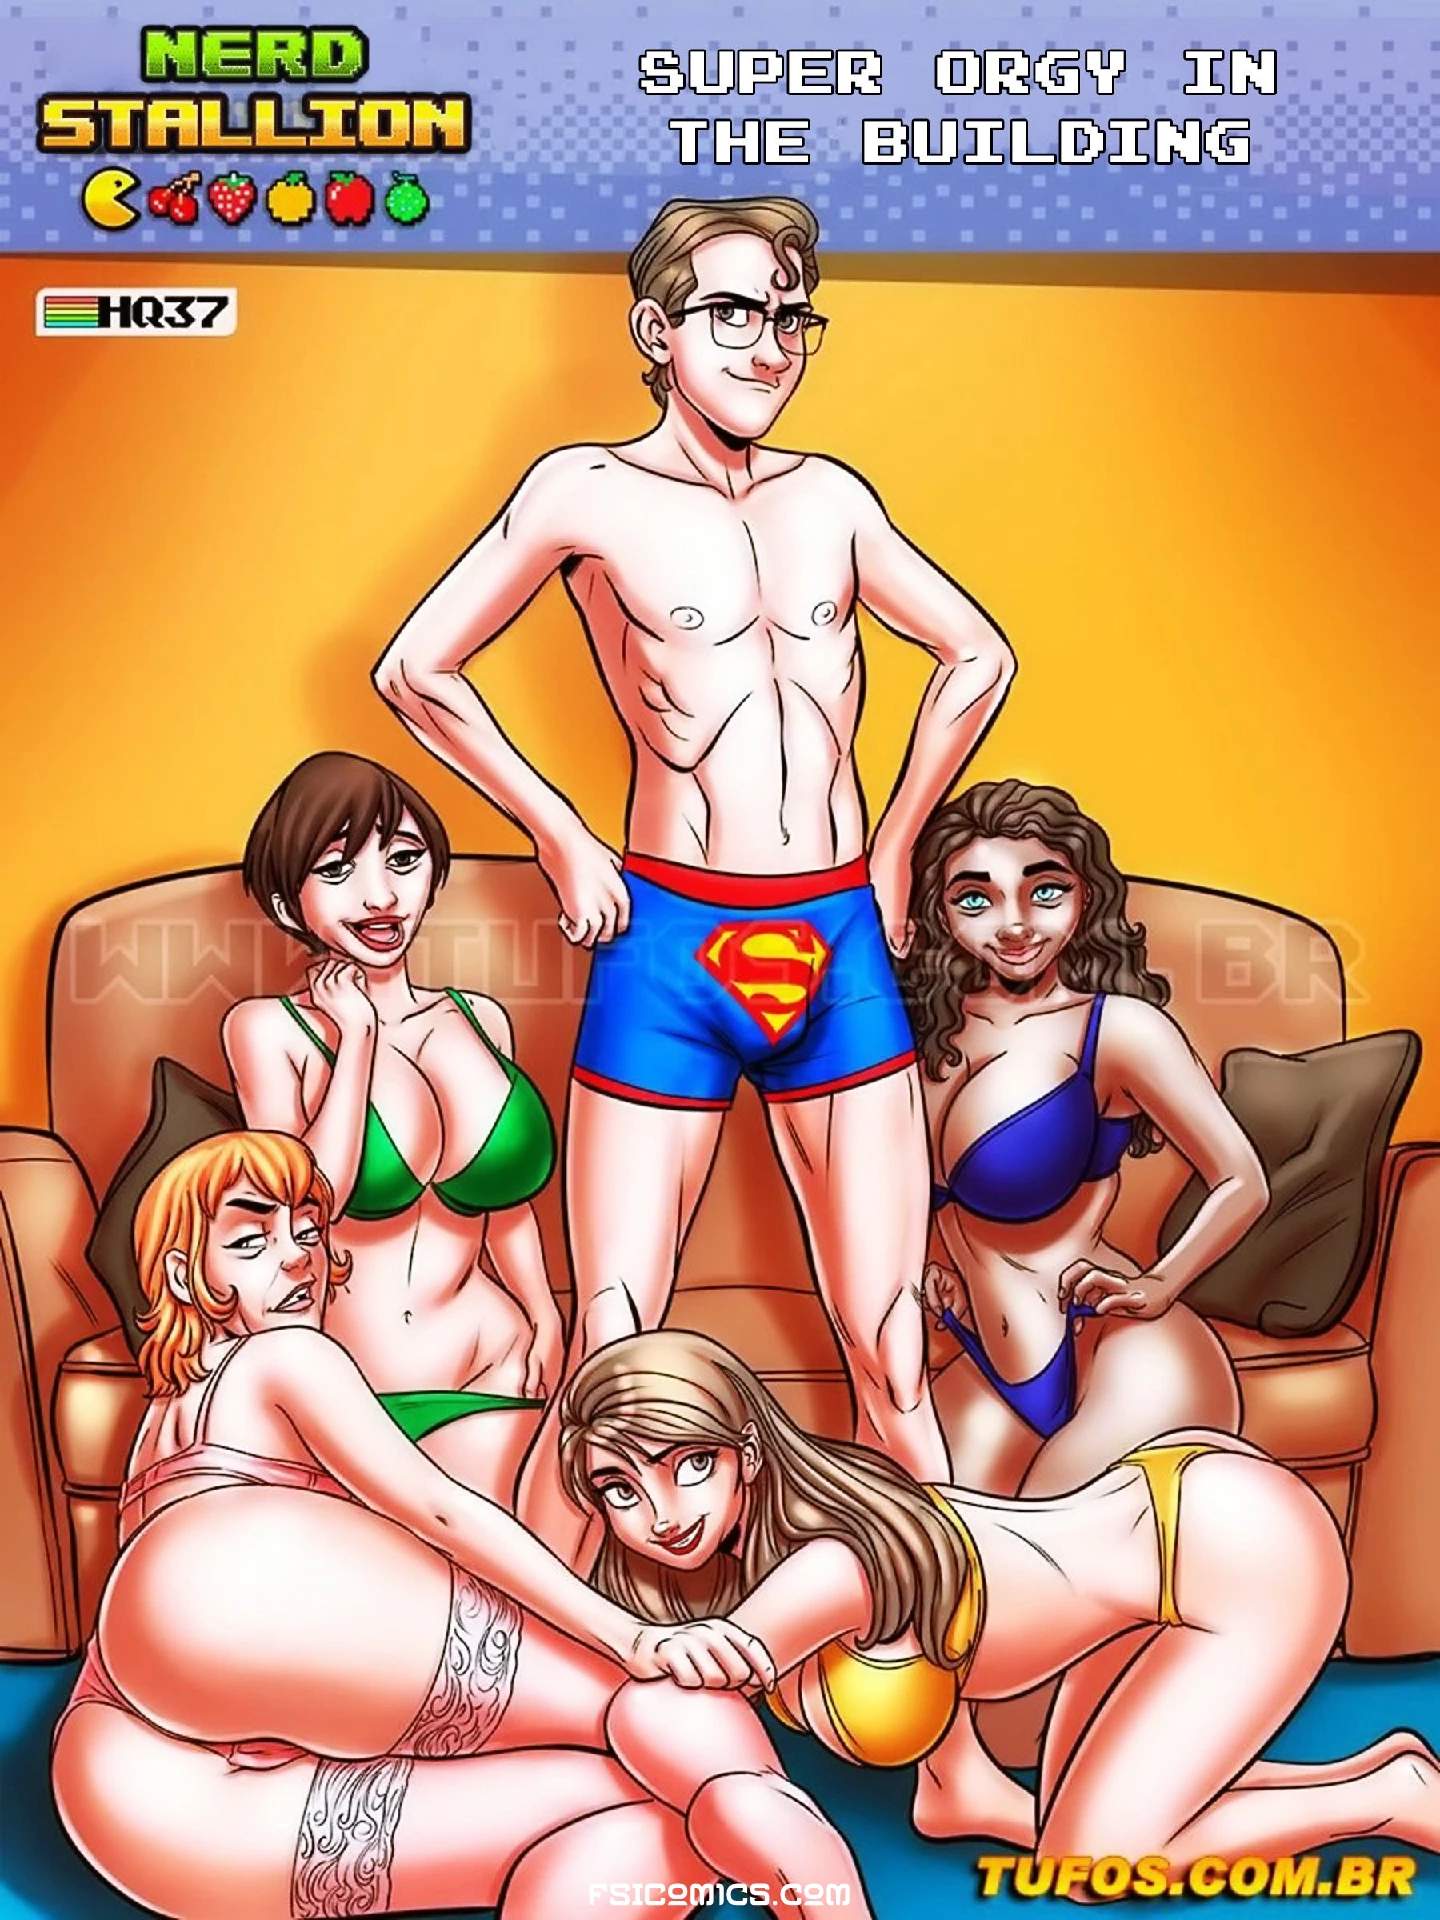 The Nerd Stallion Chapter 37 – Super Orgy in the Building – WC TF - 19 - FSIComics